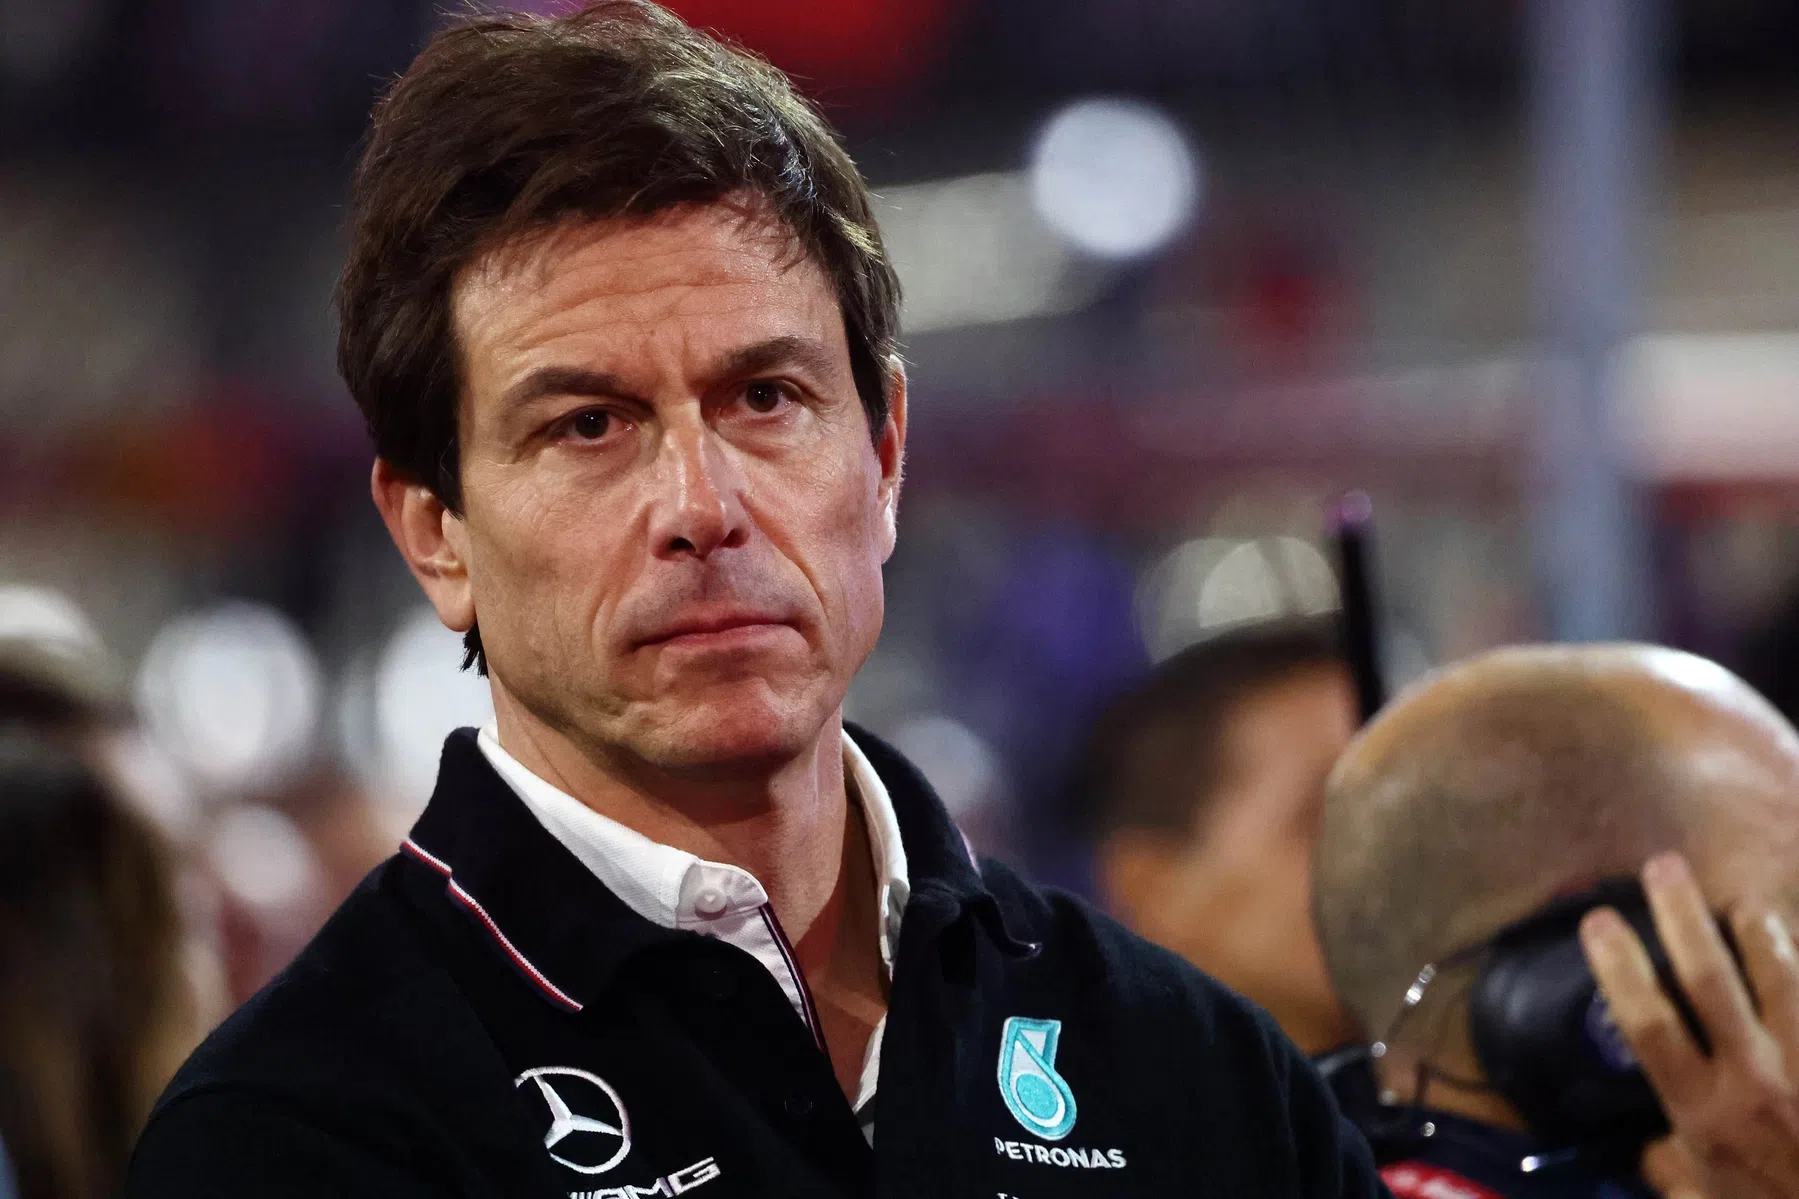 toto wolff contract verlengd mercedes ideale man?